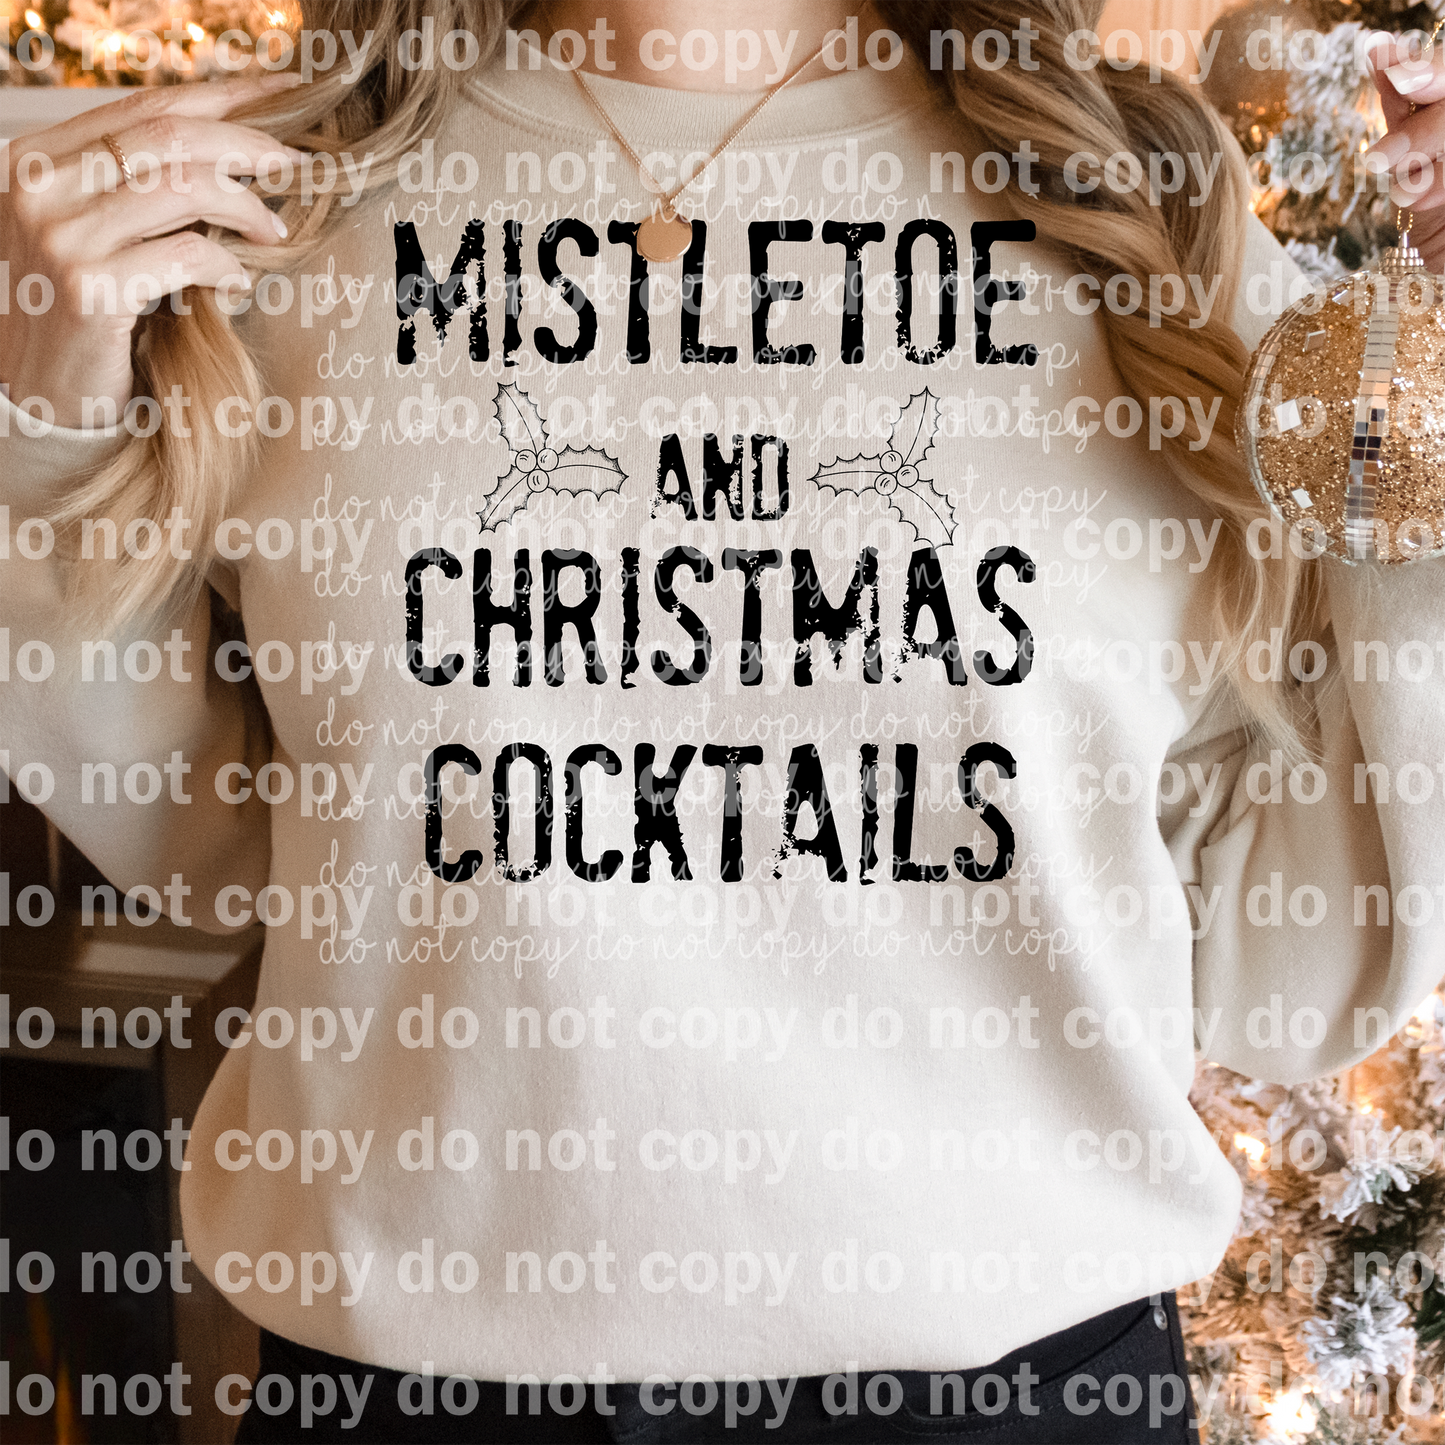 Mistletoe And Christmas Cocktails Full Color/One Color Dream Print or Sublimation Print